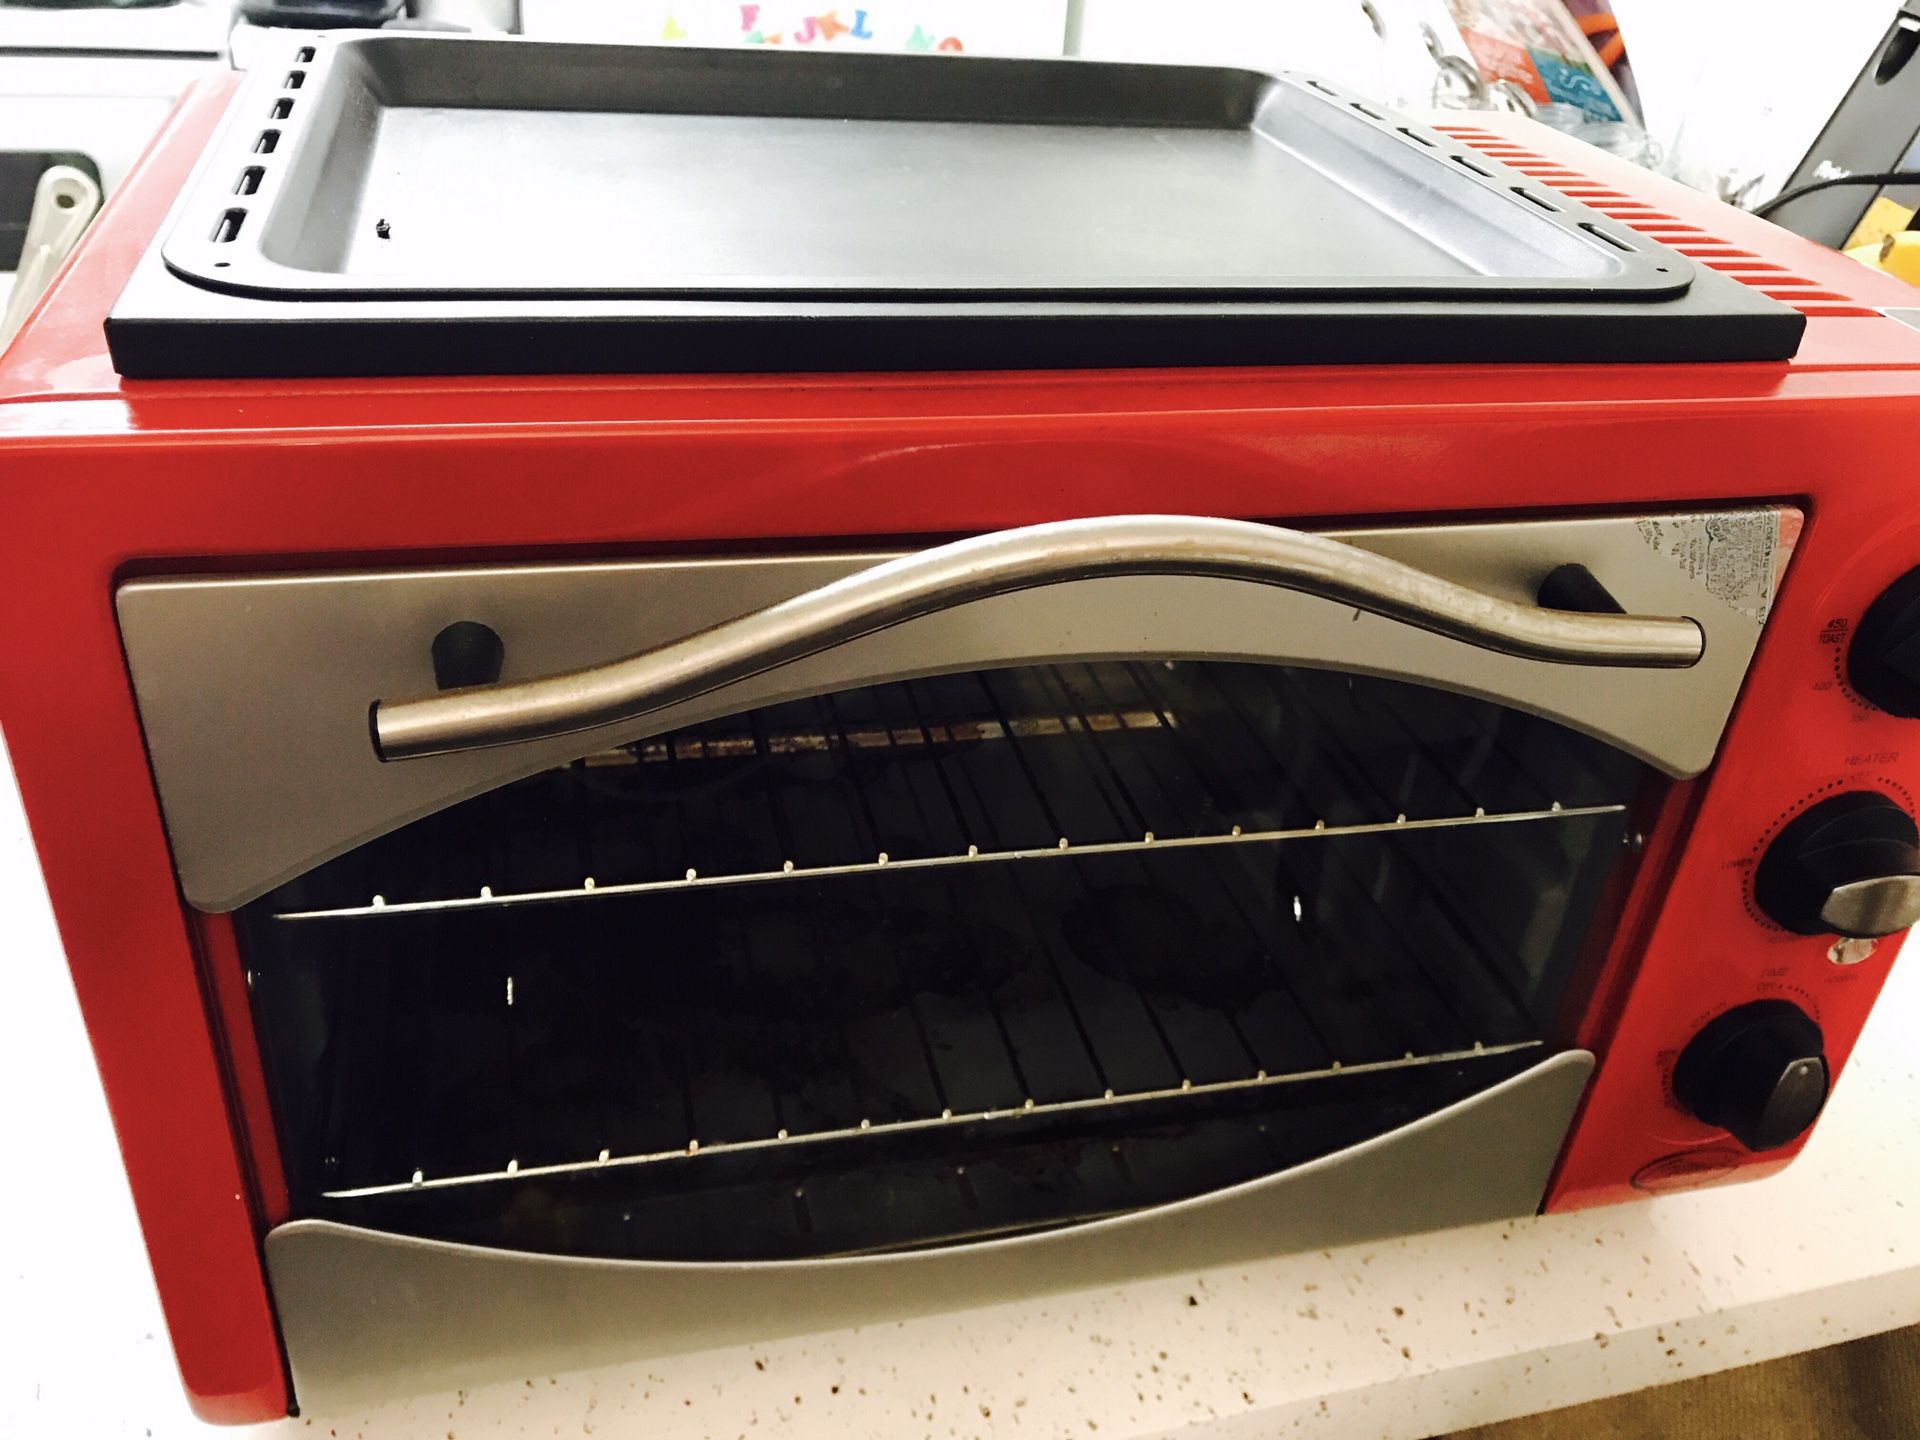 Toaster oven rotisserie,red 10-In-1 Everything Oven by Ginny's